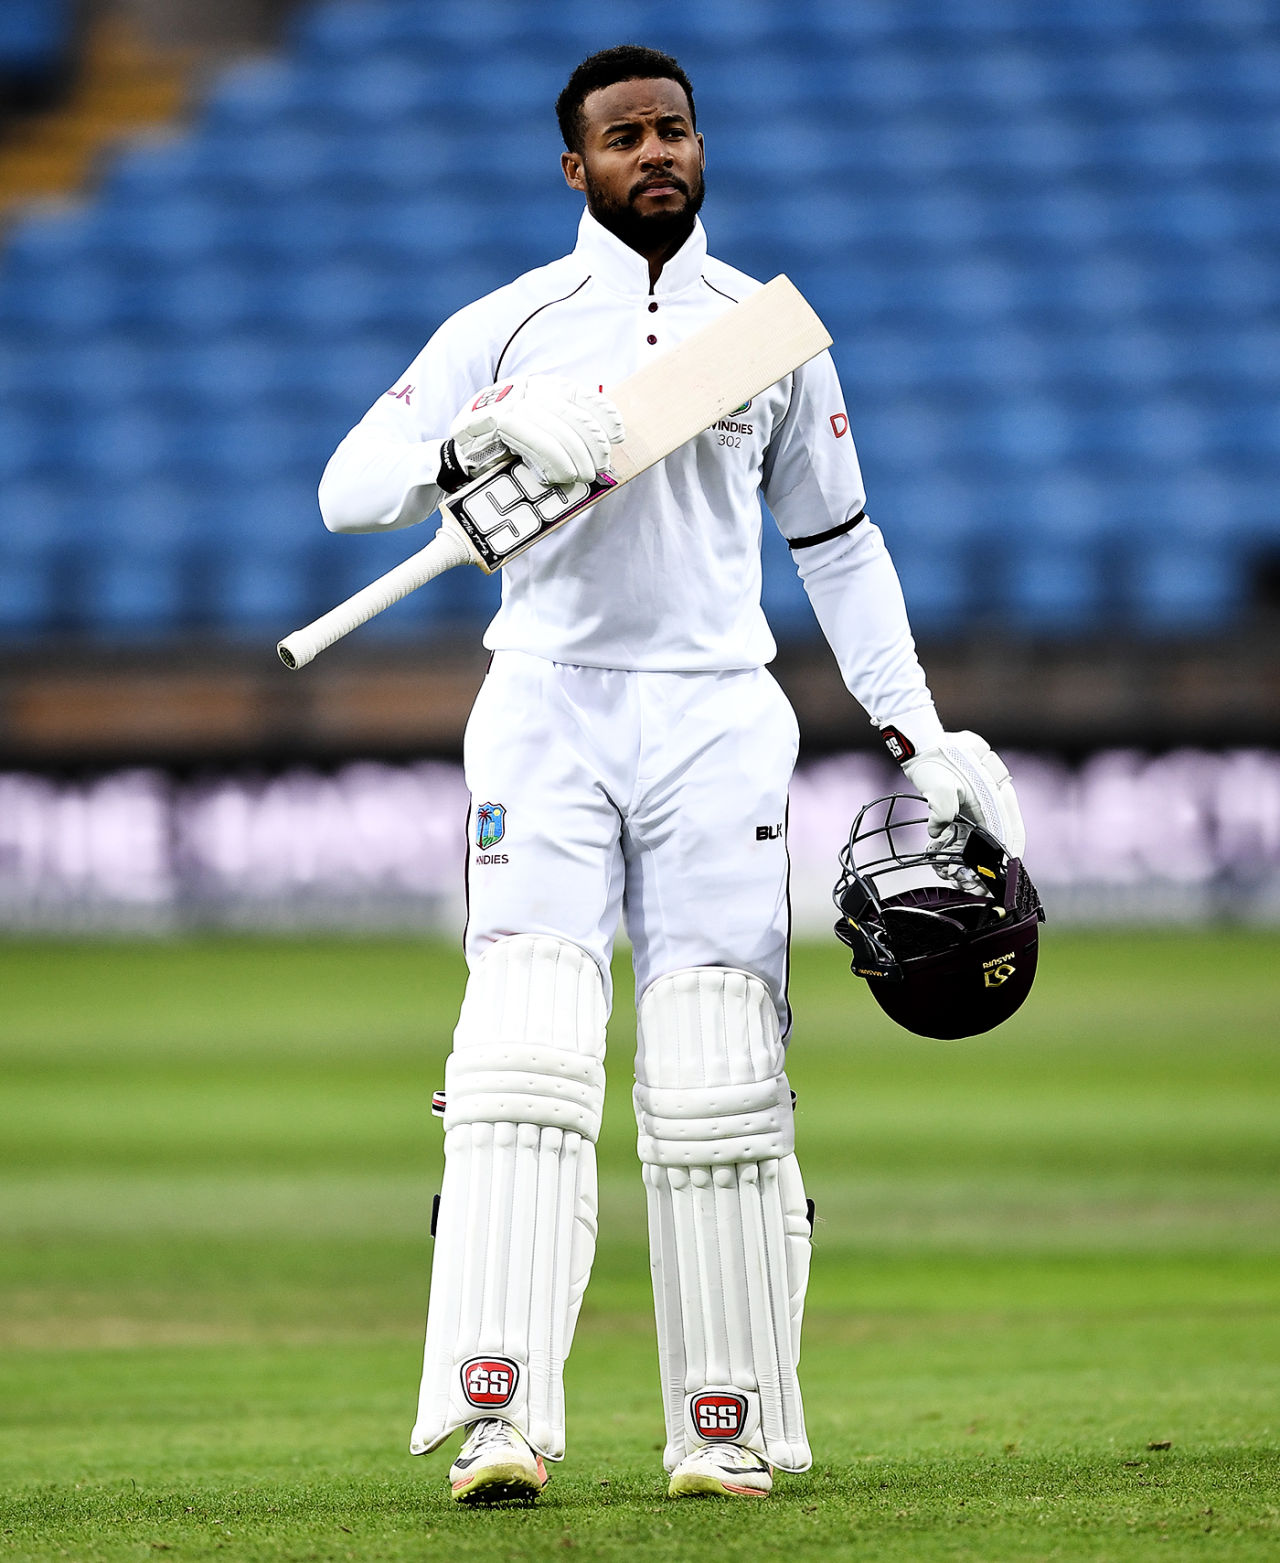 Shai Hope celebrates his hundred, England v West Indies, 2nd Investec Test, Headingley, 5th day, August 29, 2017 